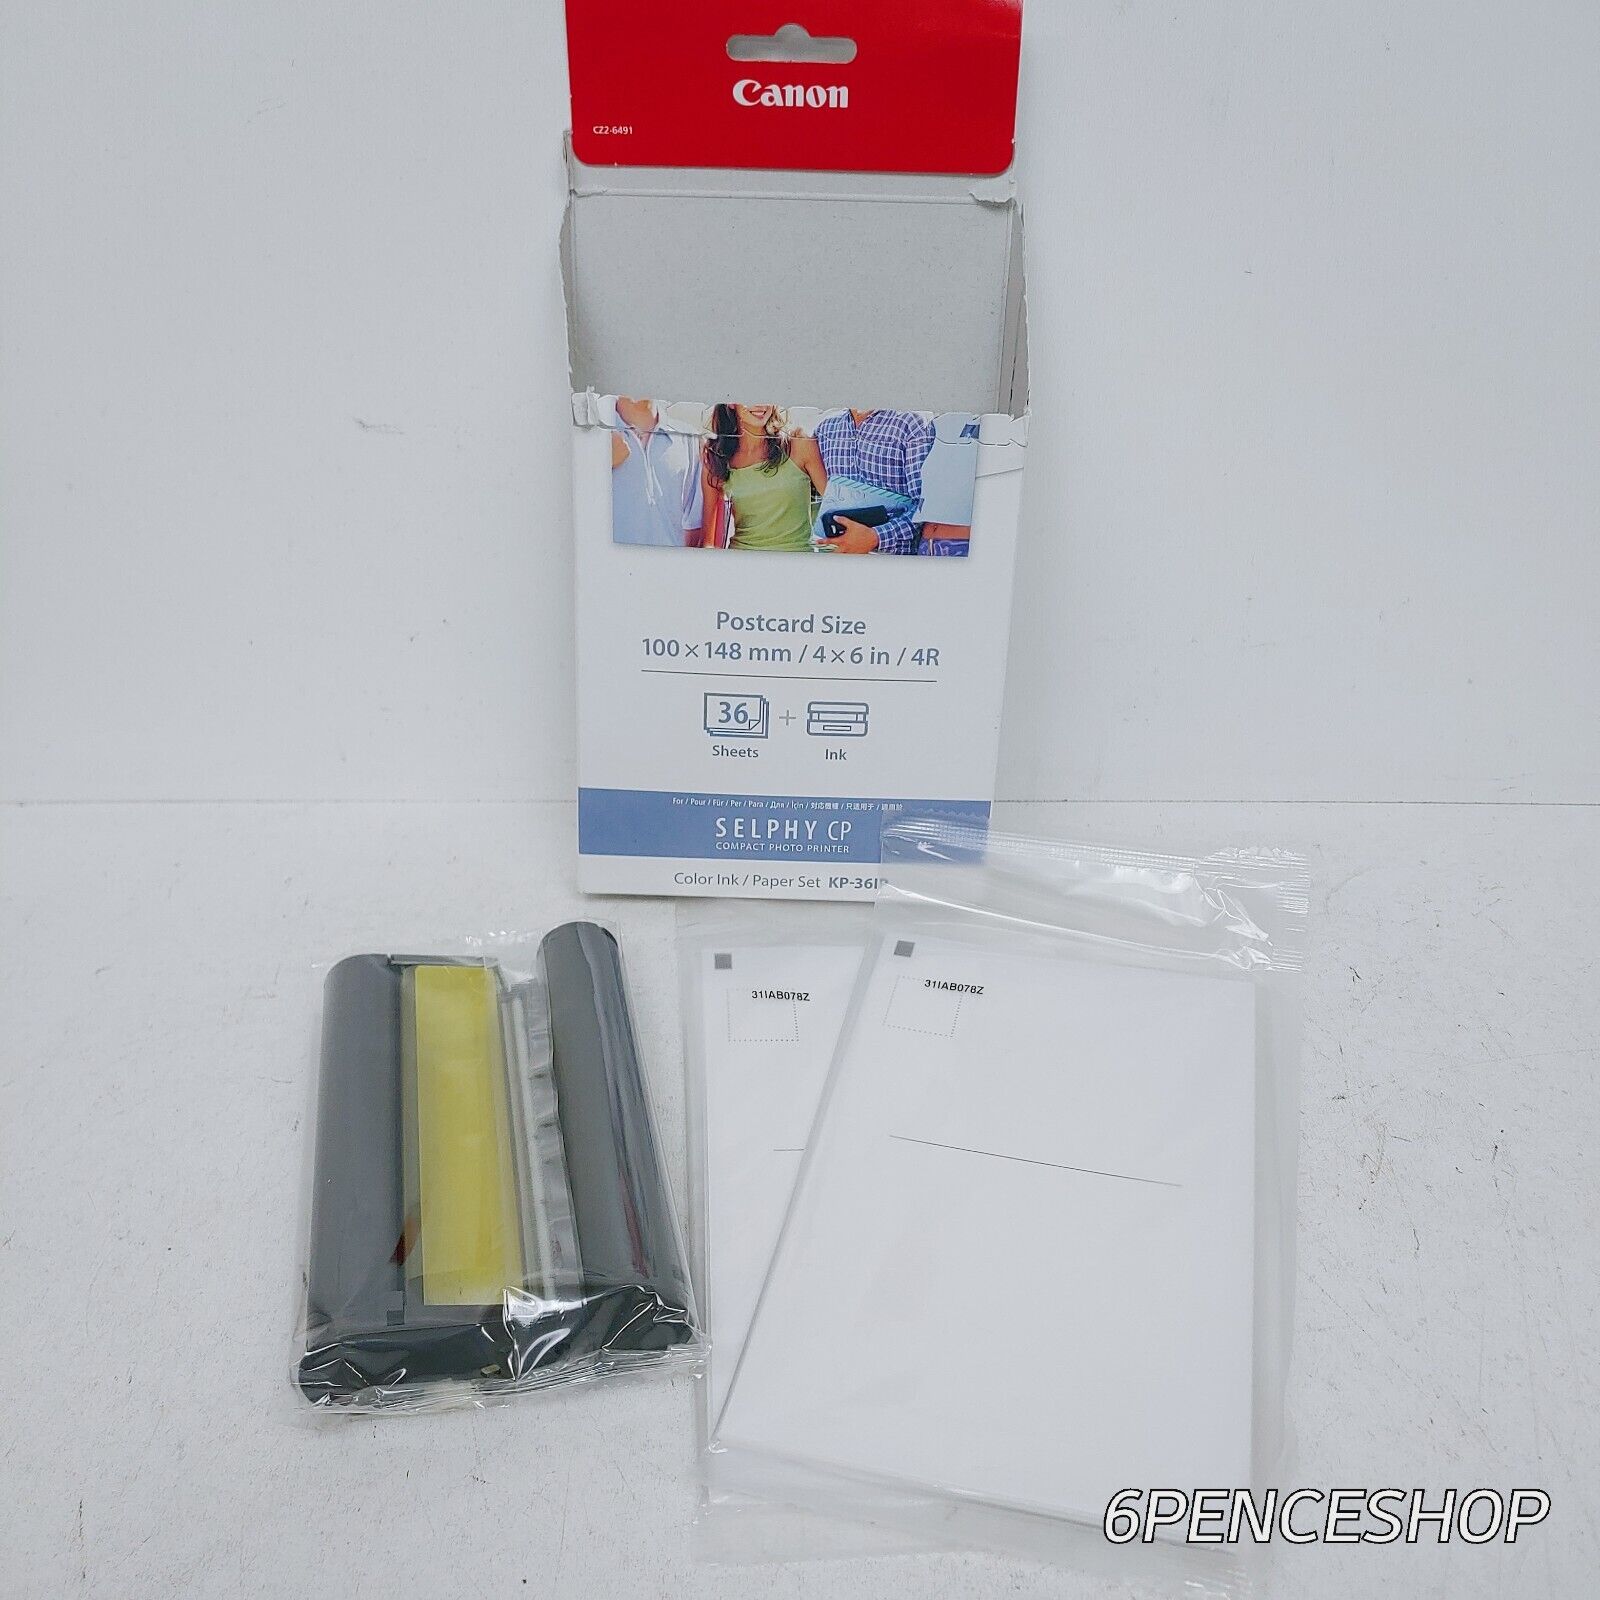 *Sealed in OB* Canon KP-36IP Color Ink + 36 POST Card Sheets